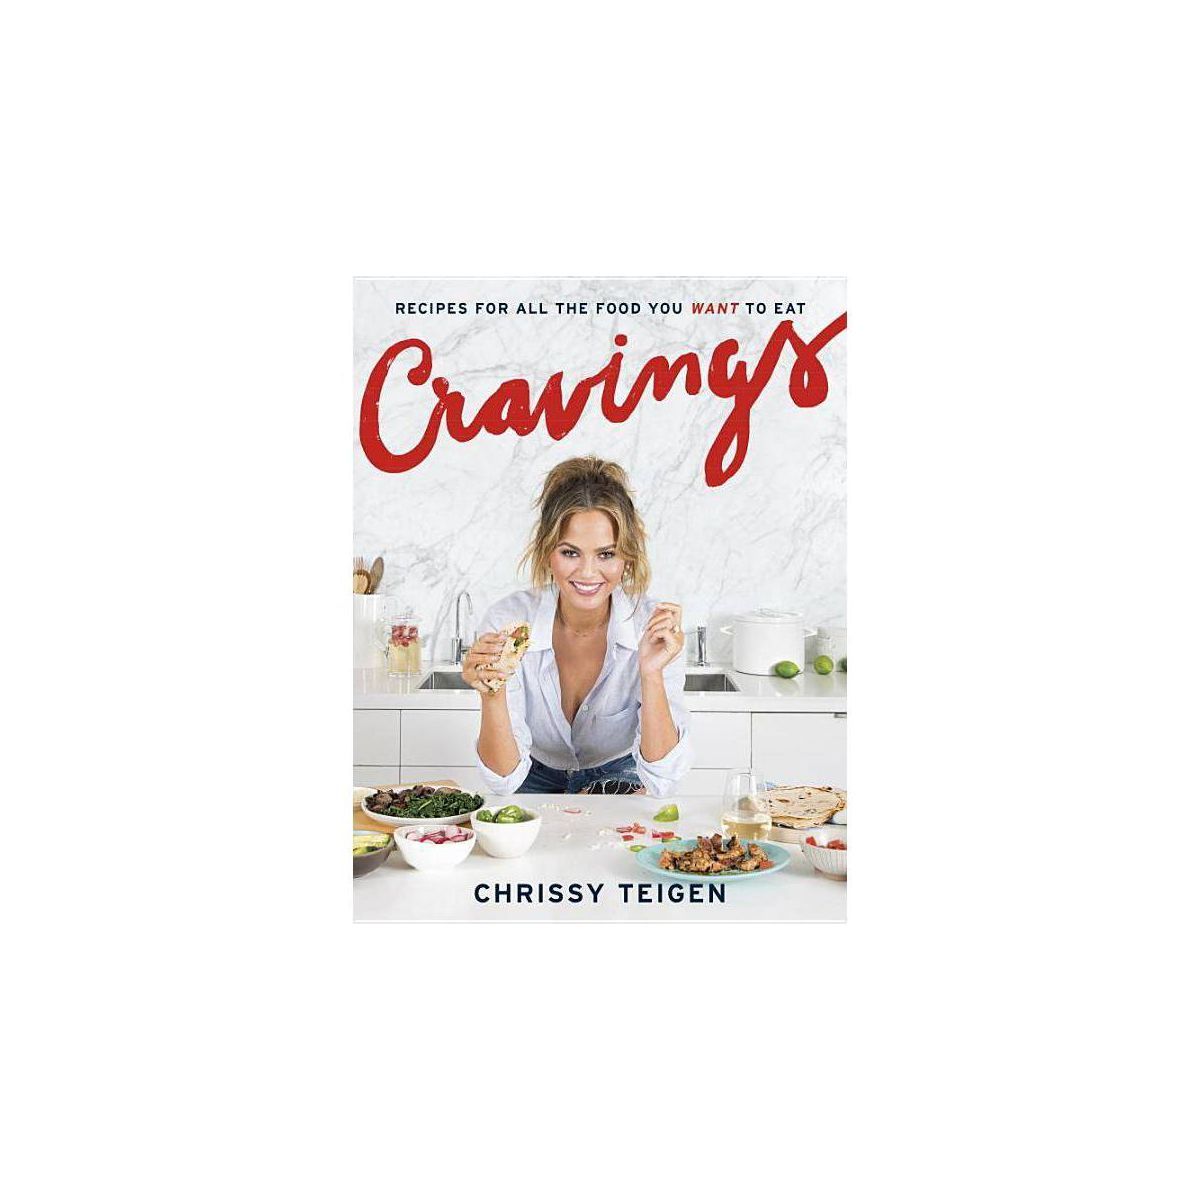 Cravings: Recipes for All the Food You Want to Eat by Chrissy Teigen and Adeena Sussman (Hardcove... | Target